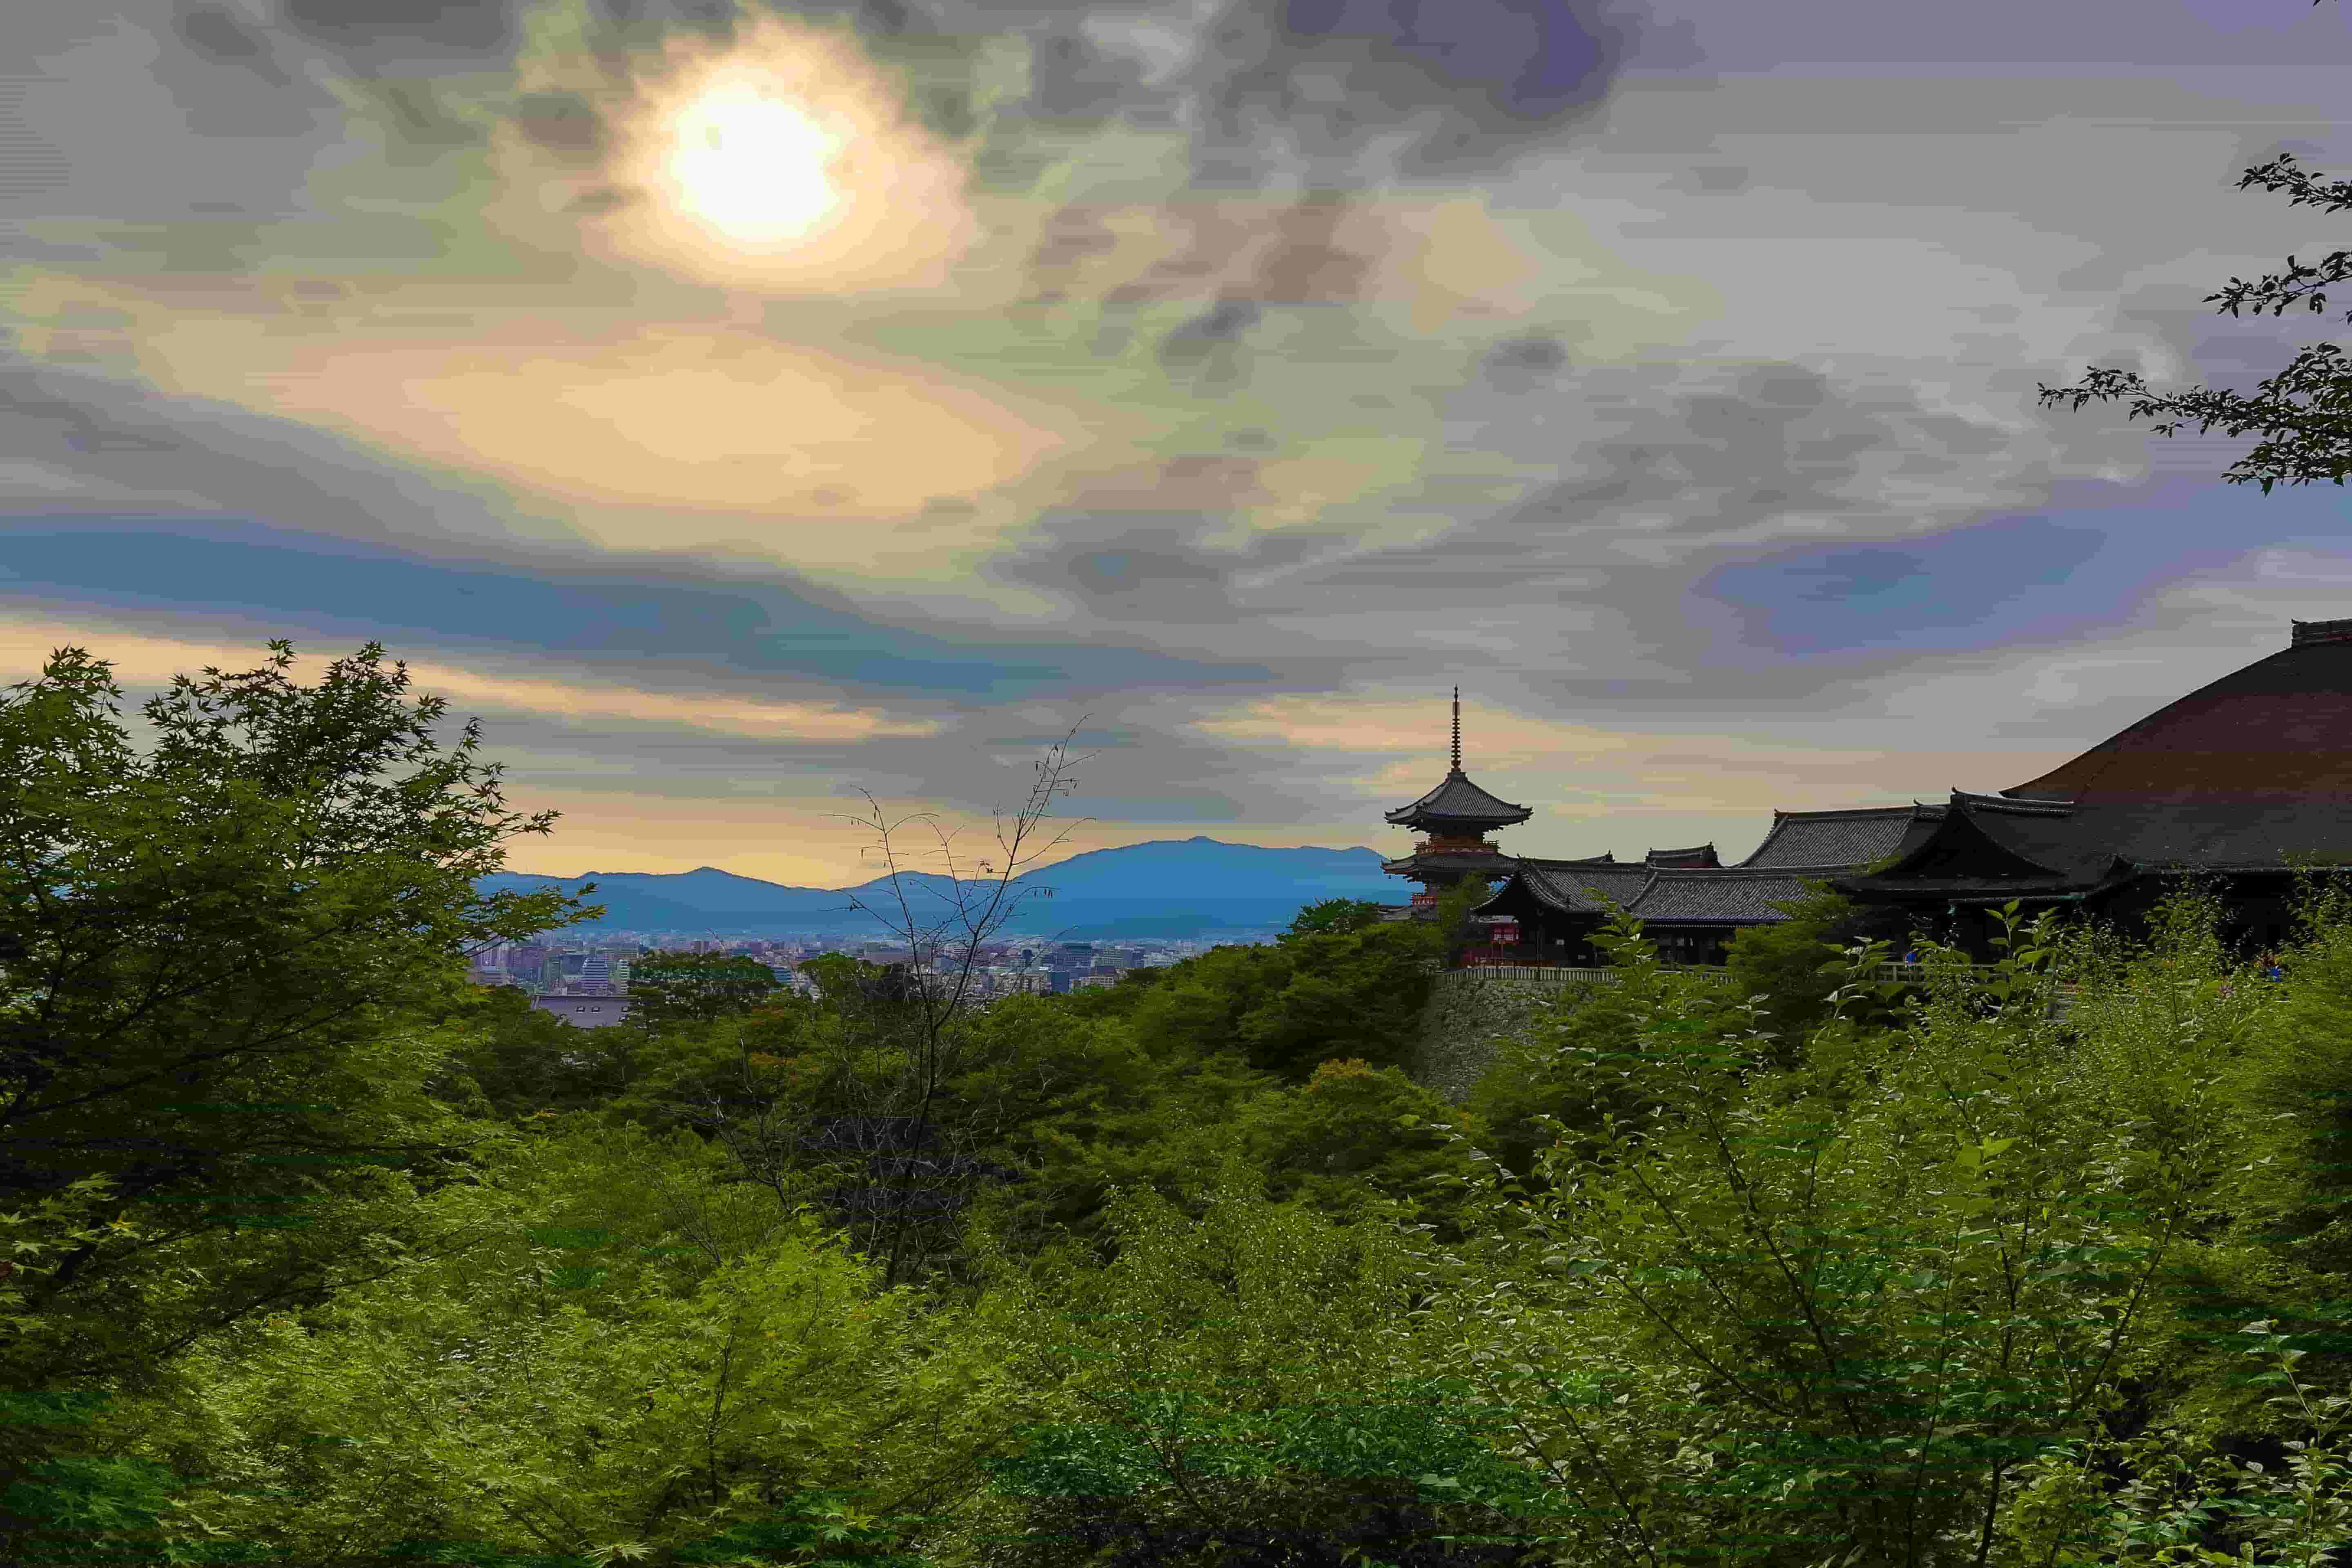 A pagoda roof building, peeking up through tree tops, with a city and hills in the background, and hazy sun above